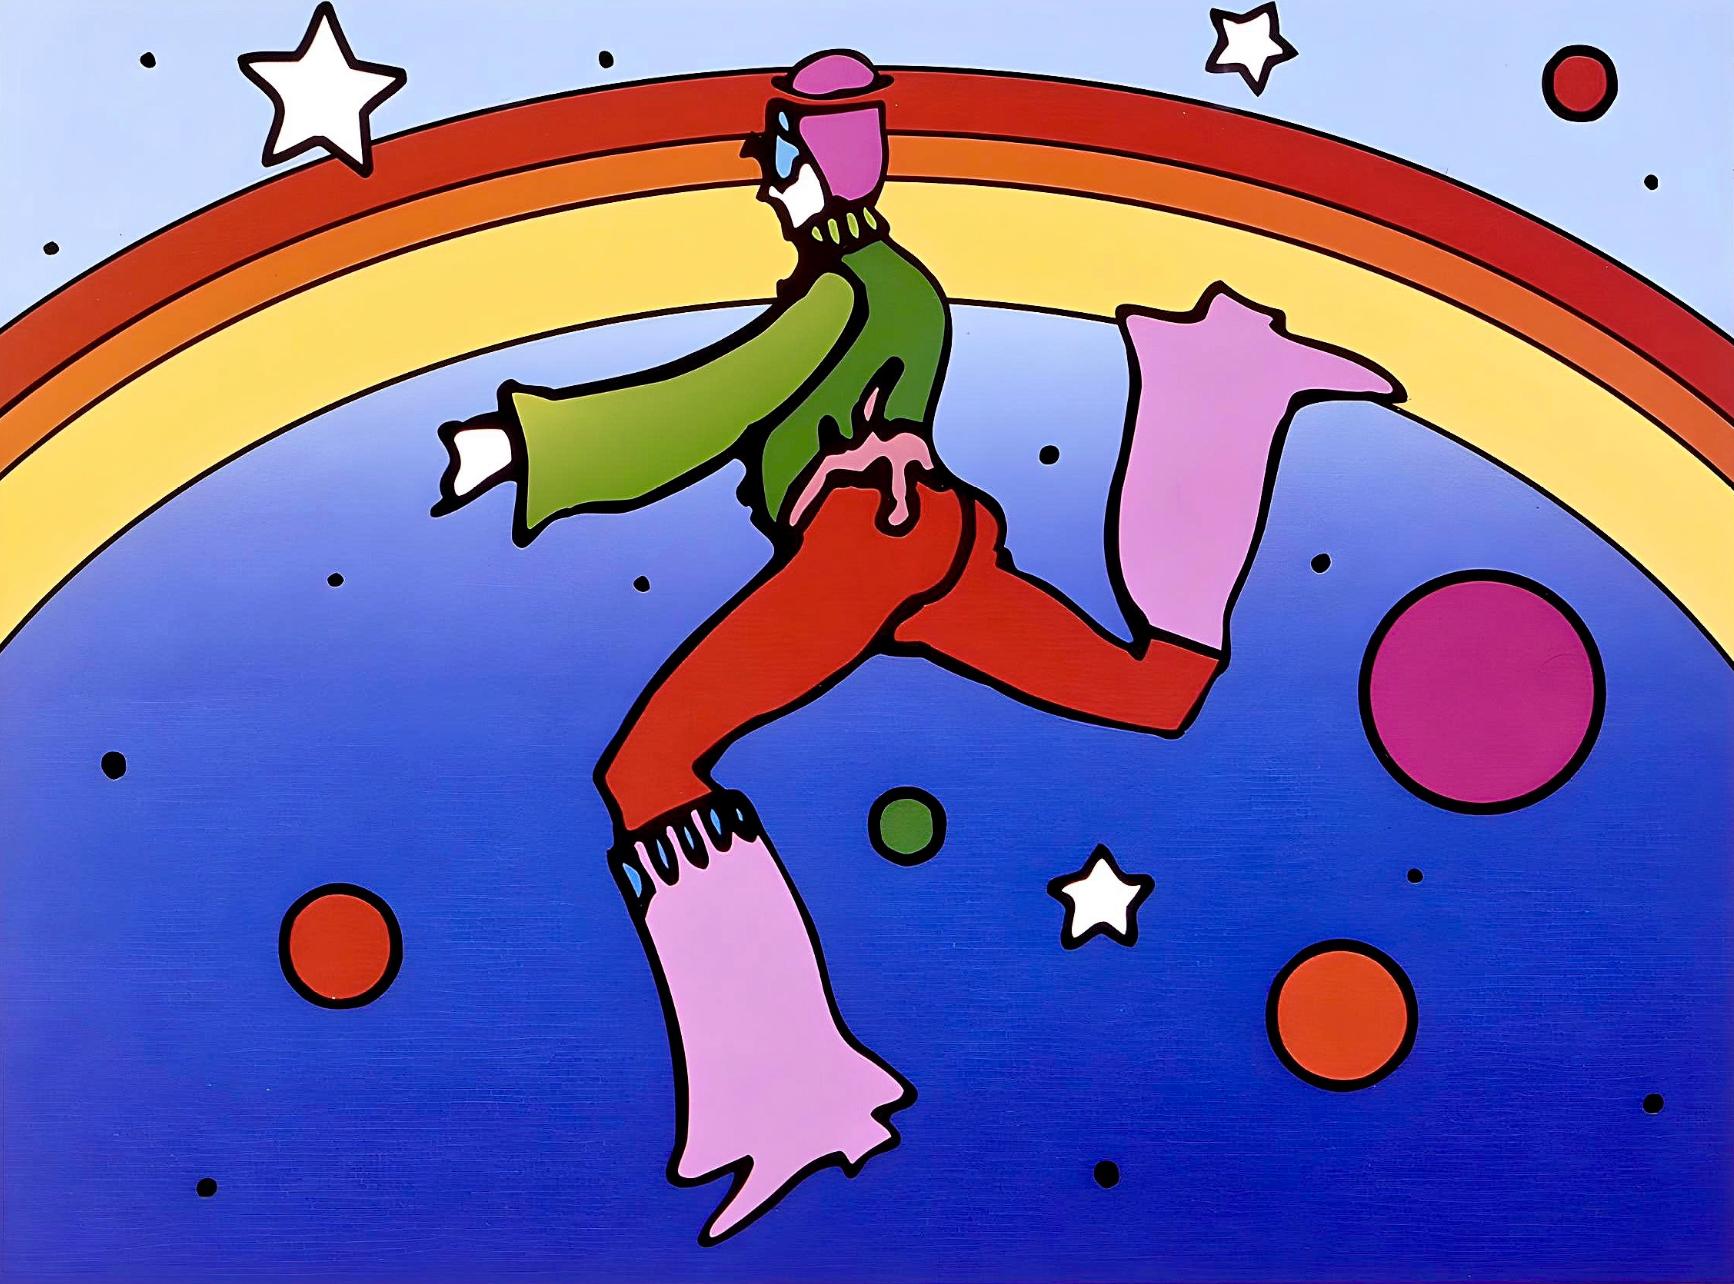 Artist: Peter Max (1937)
Title: Cosmic Jumper, Detail II
Year: 2001
Edition: 500/500, plus proofs
Medium: Lithograph on Lustro Saxony paper
Size: 9 x 11 inches
Condition: Excellent
Inscription: Signed and numbered by the artist.
Notes: Published by